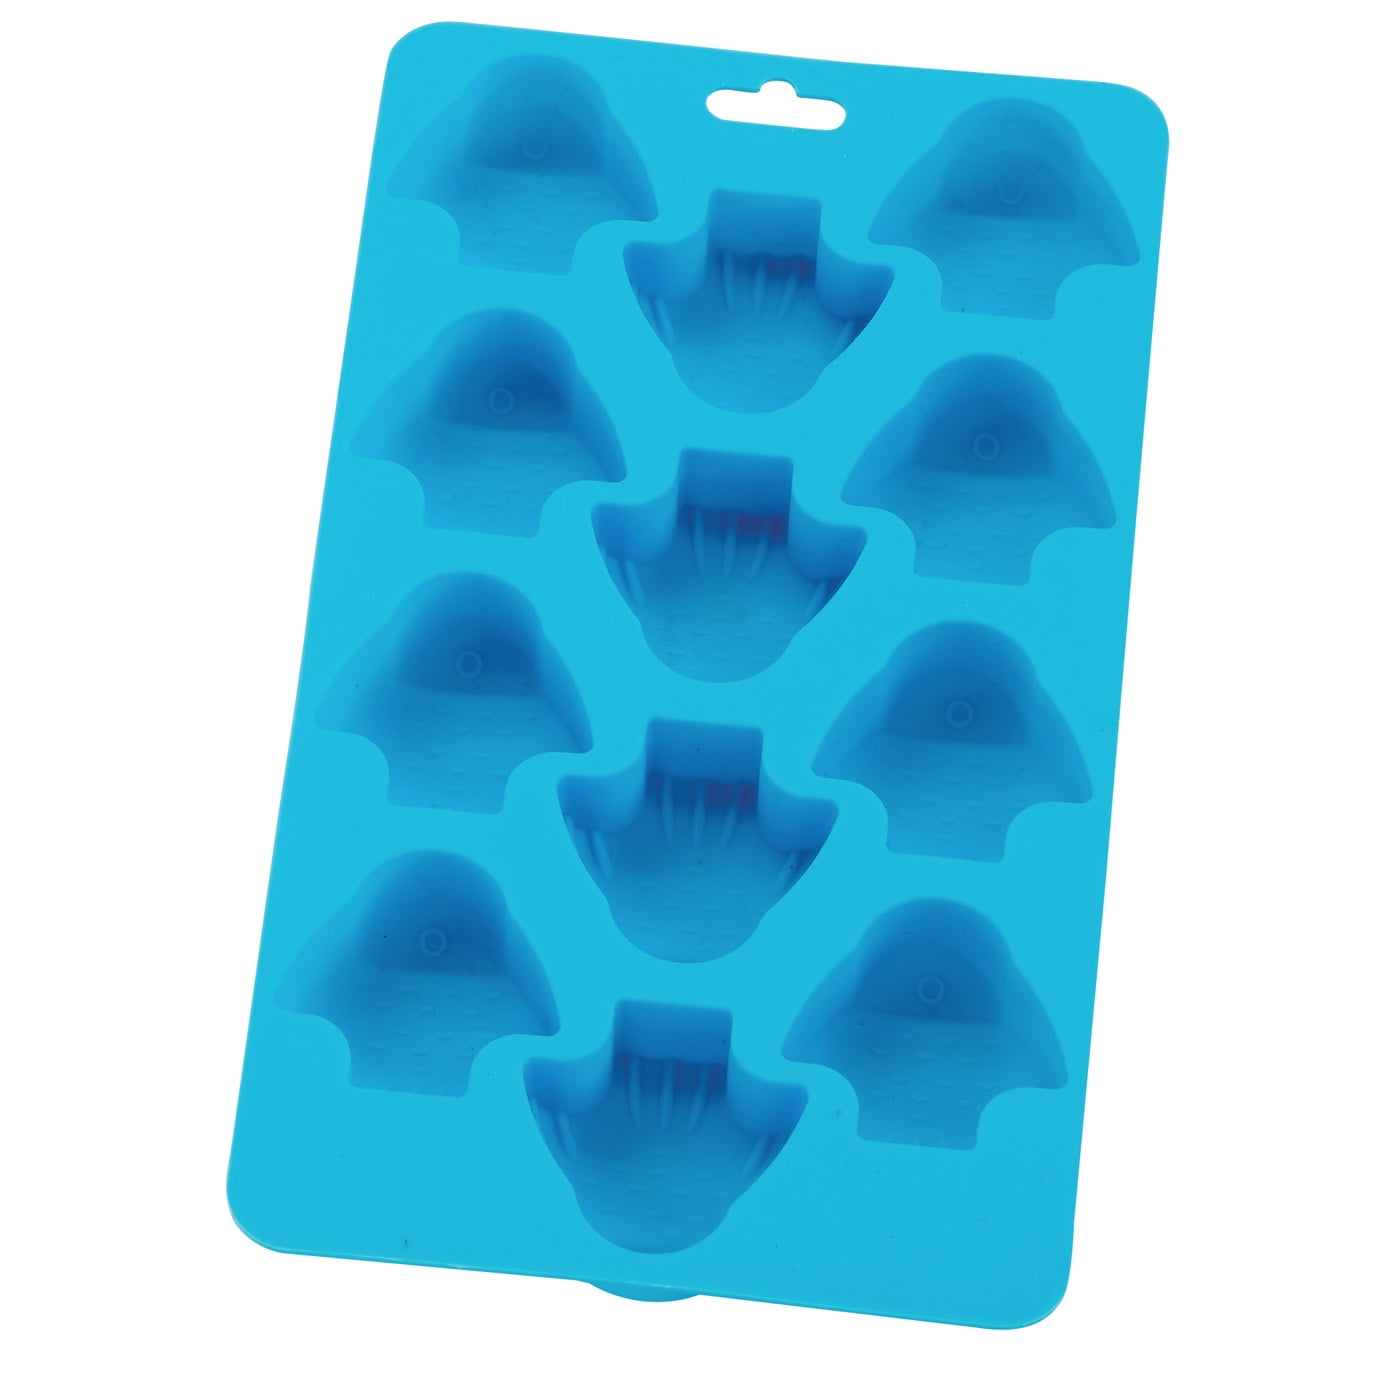 HIC Fish Ice Cube Tray and Baking Mold, Silicone, 8 by 4-1/4-Inch, Blue ...